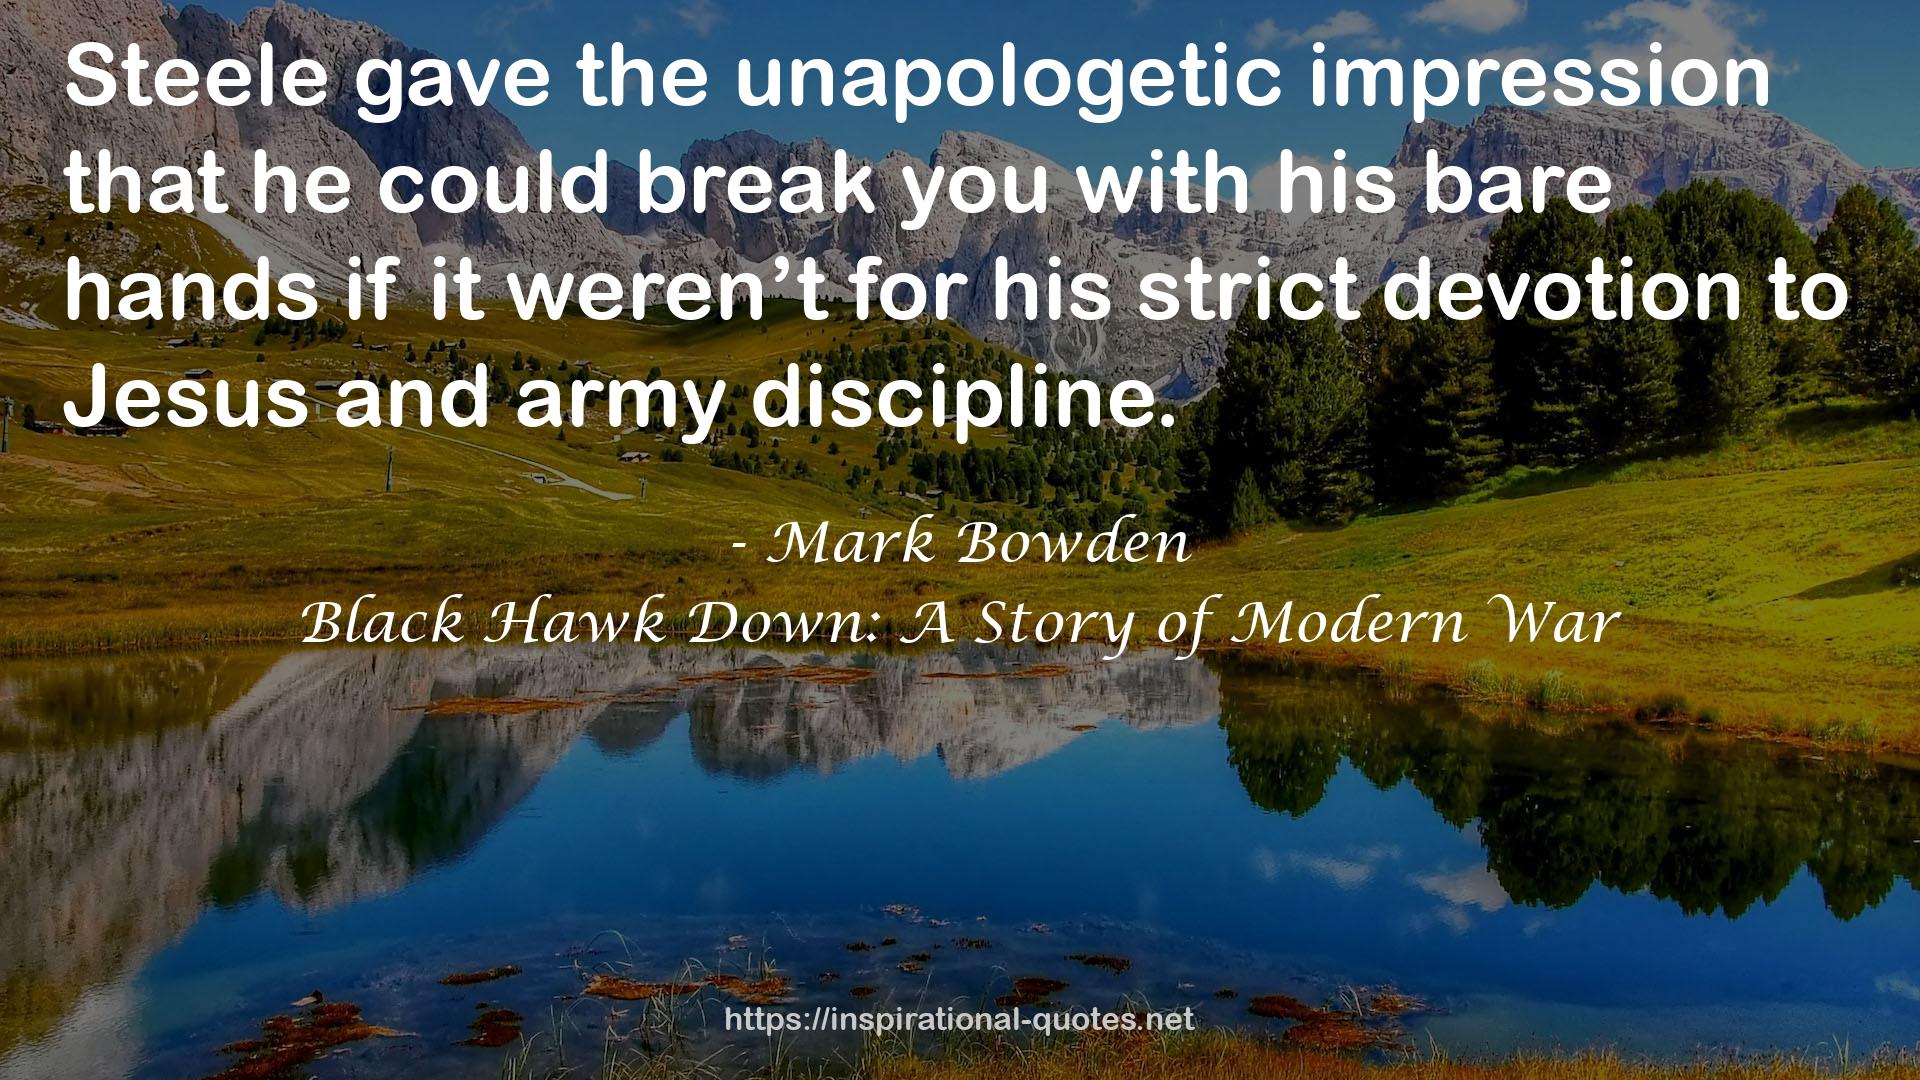 Mark Bowden QUOTES